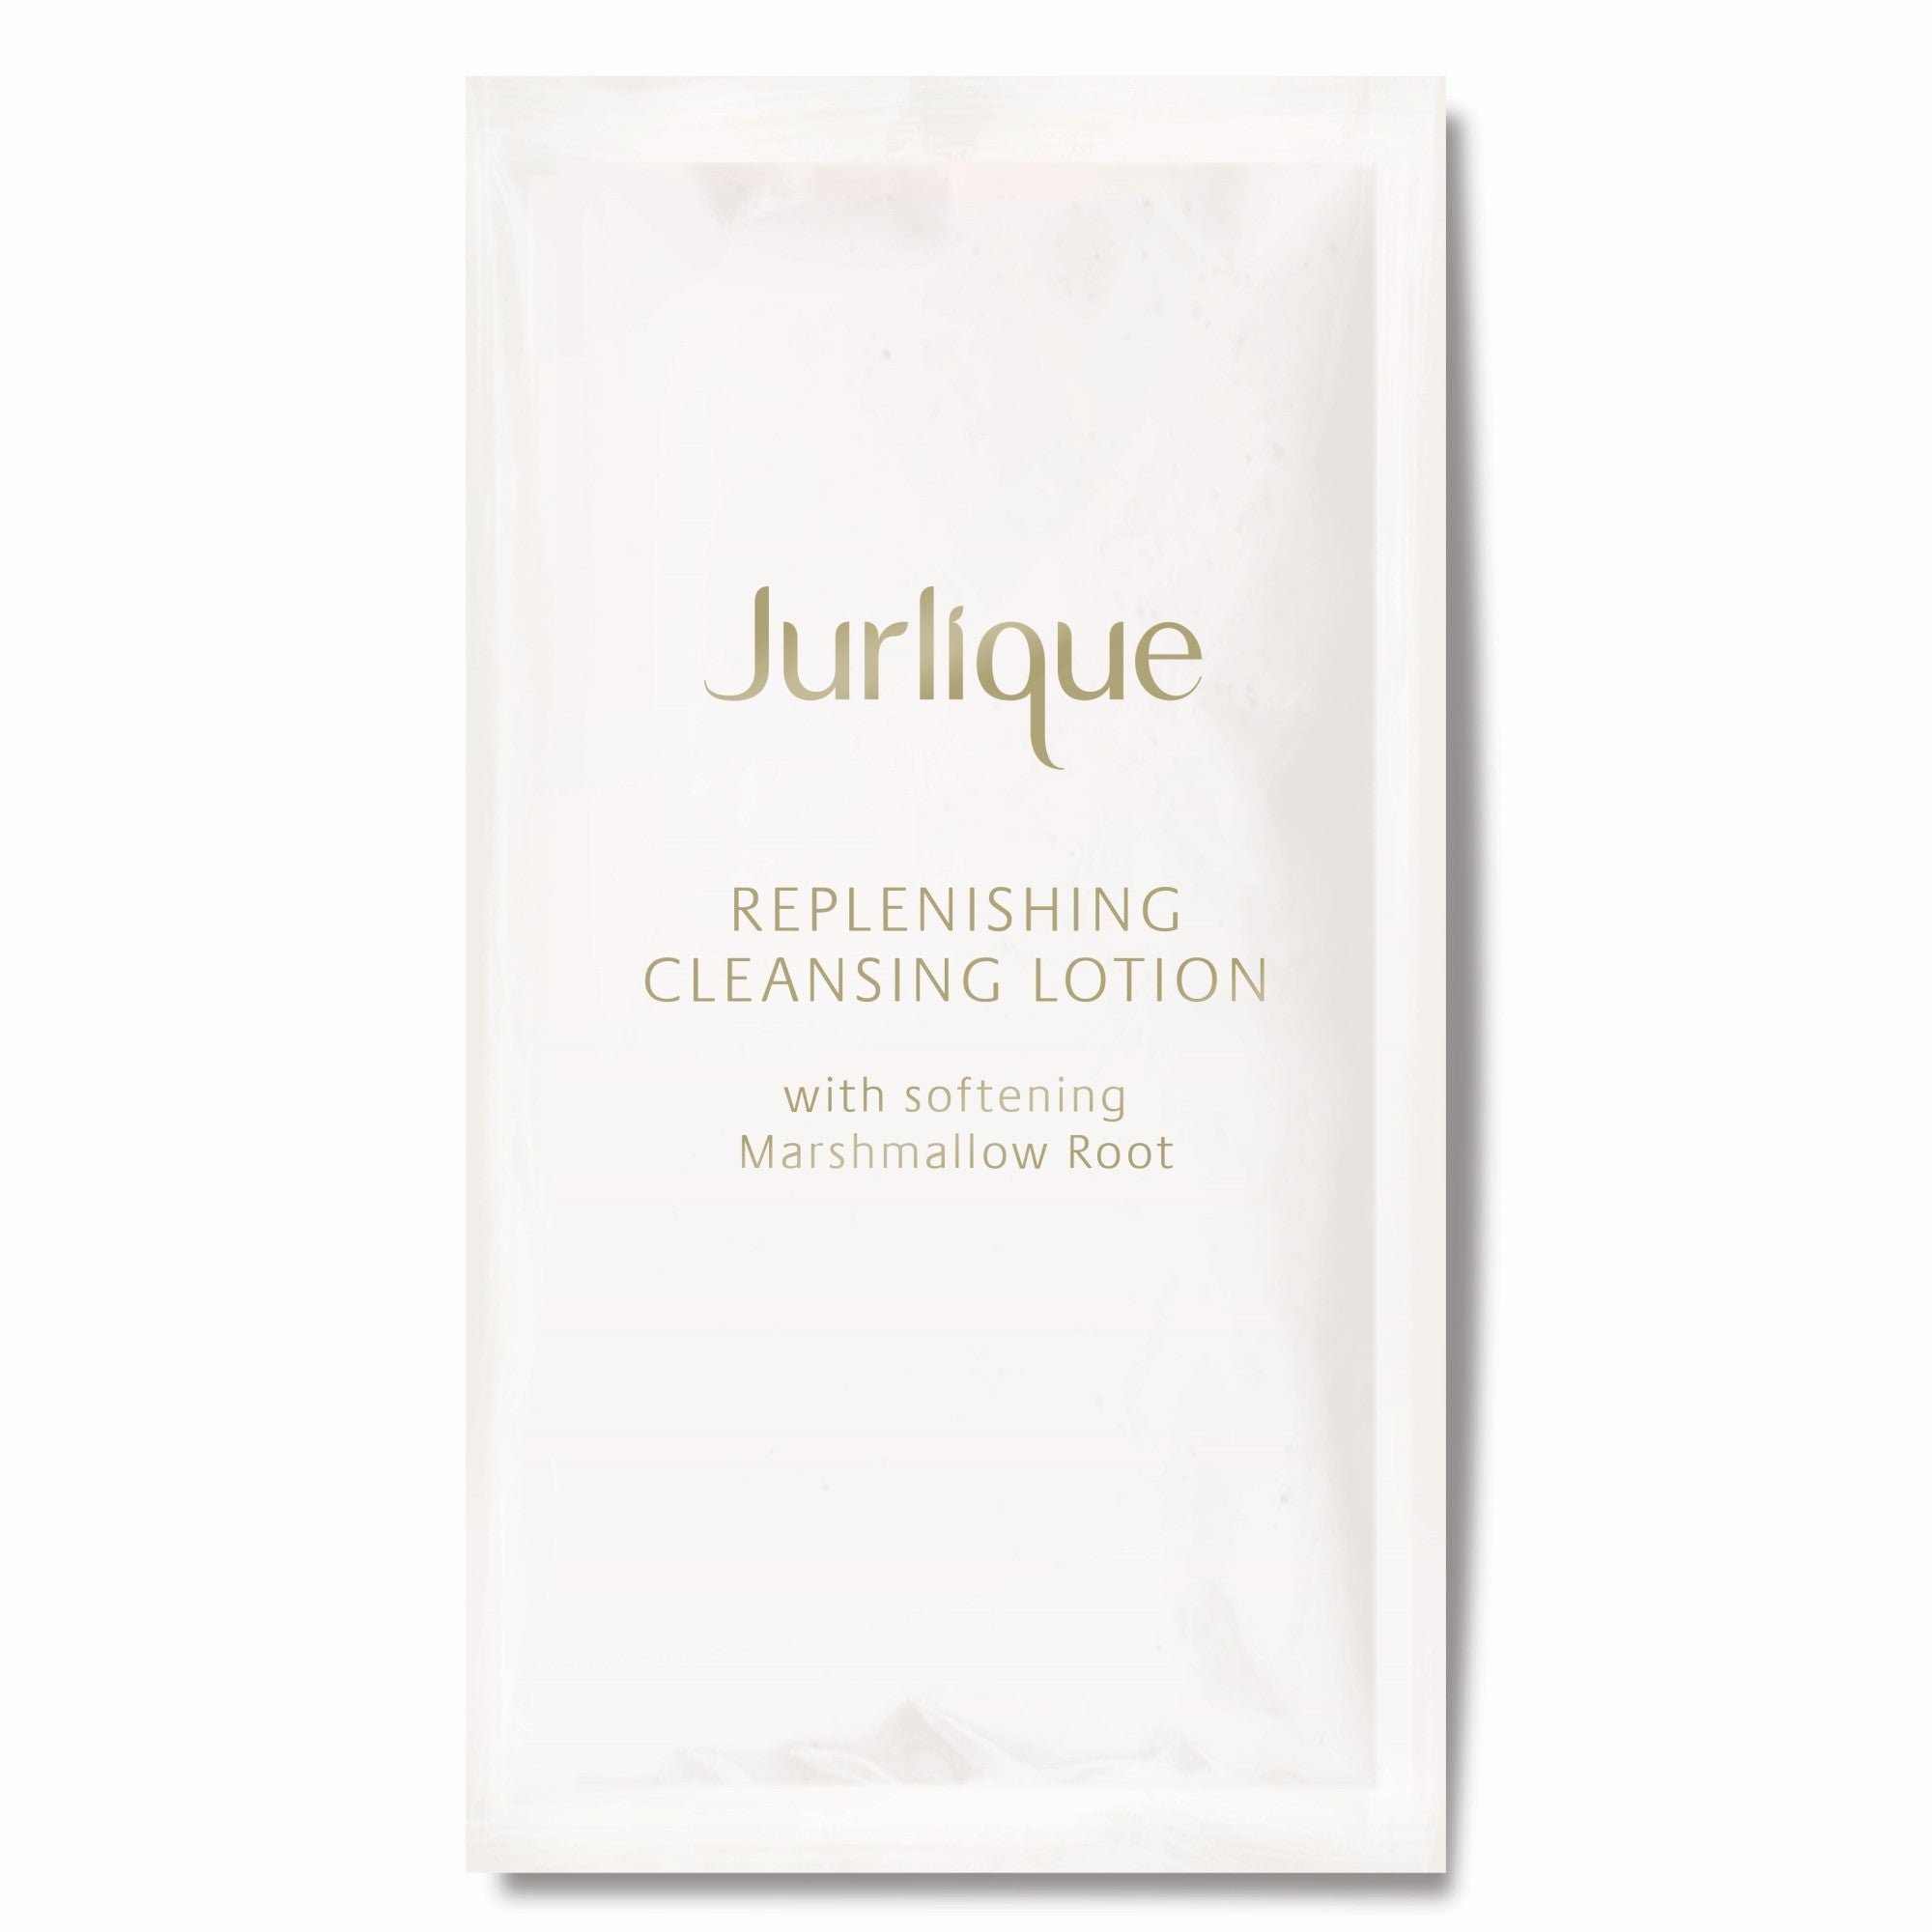 Replenishing Cleansing Lotion 2mL